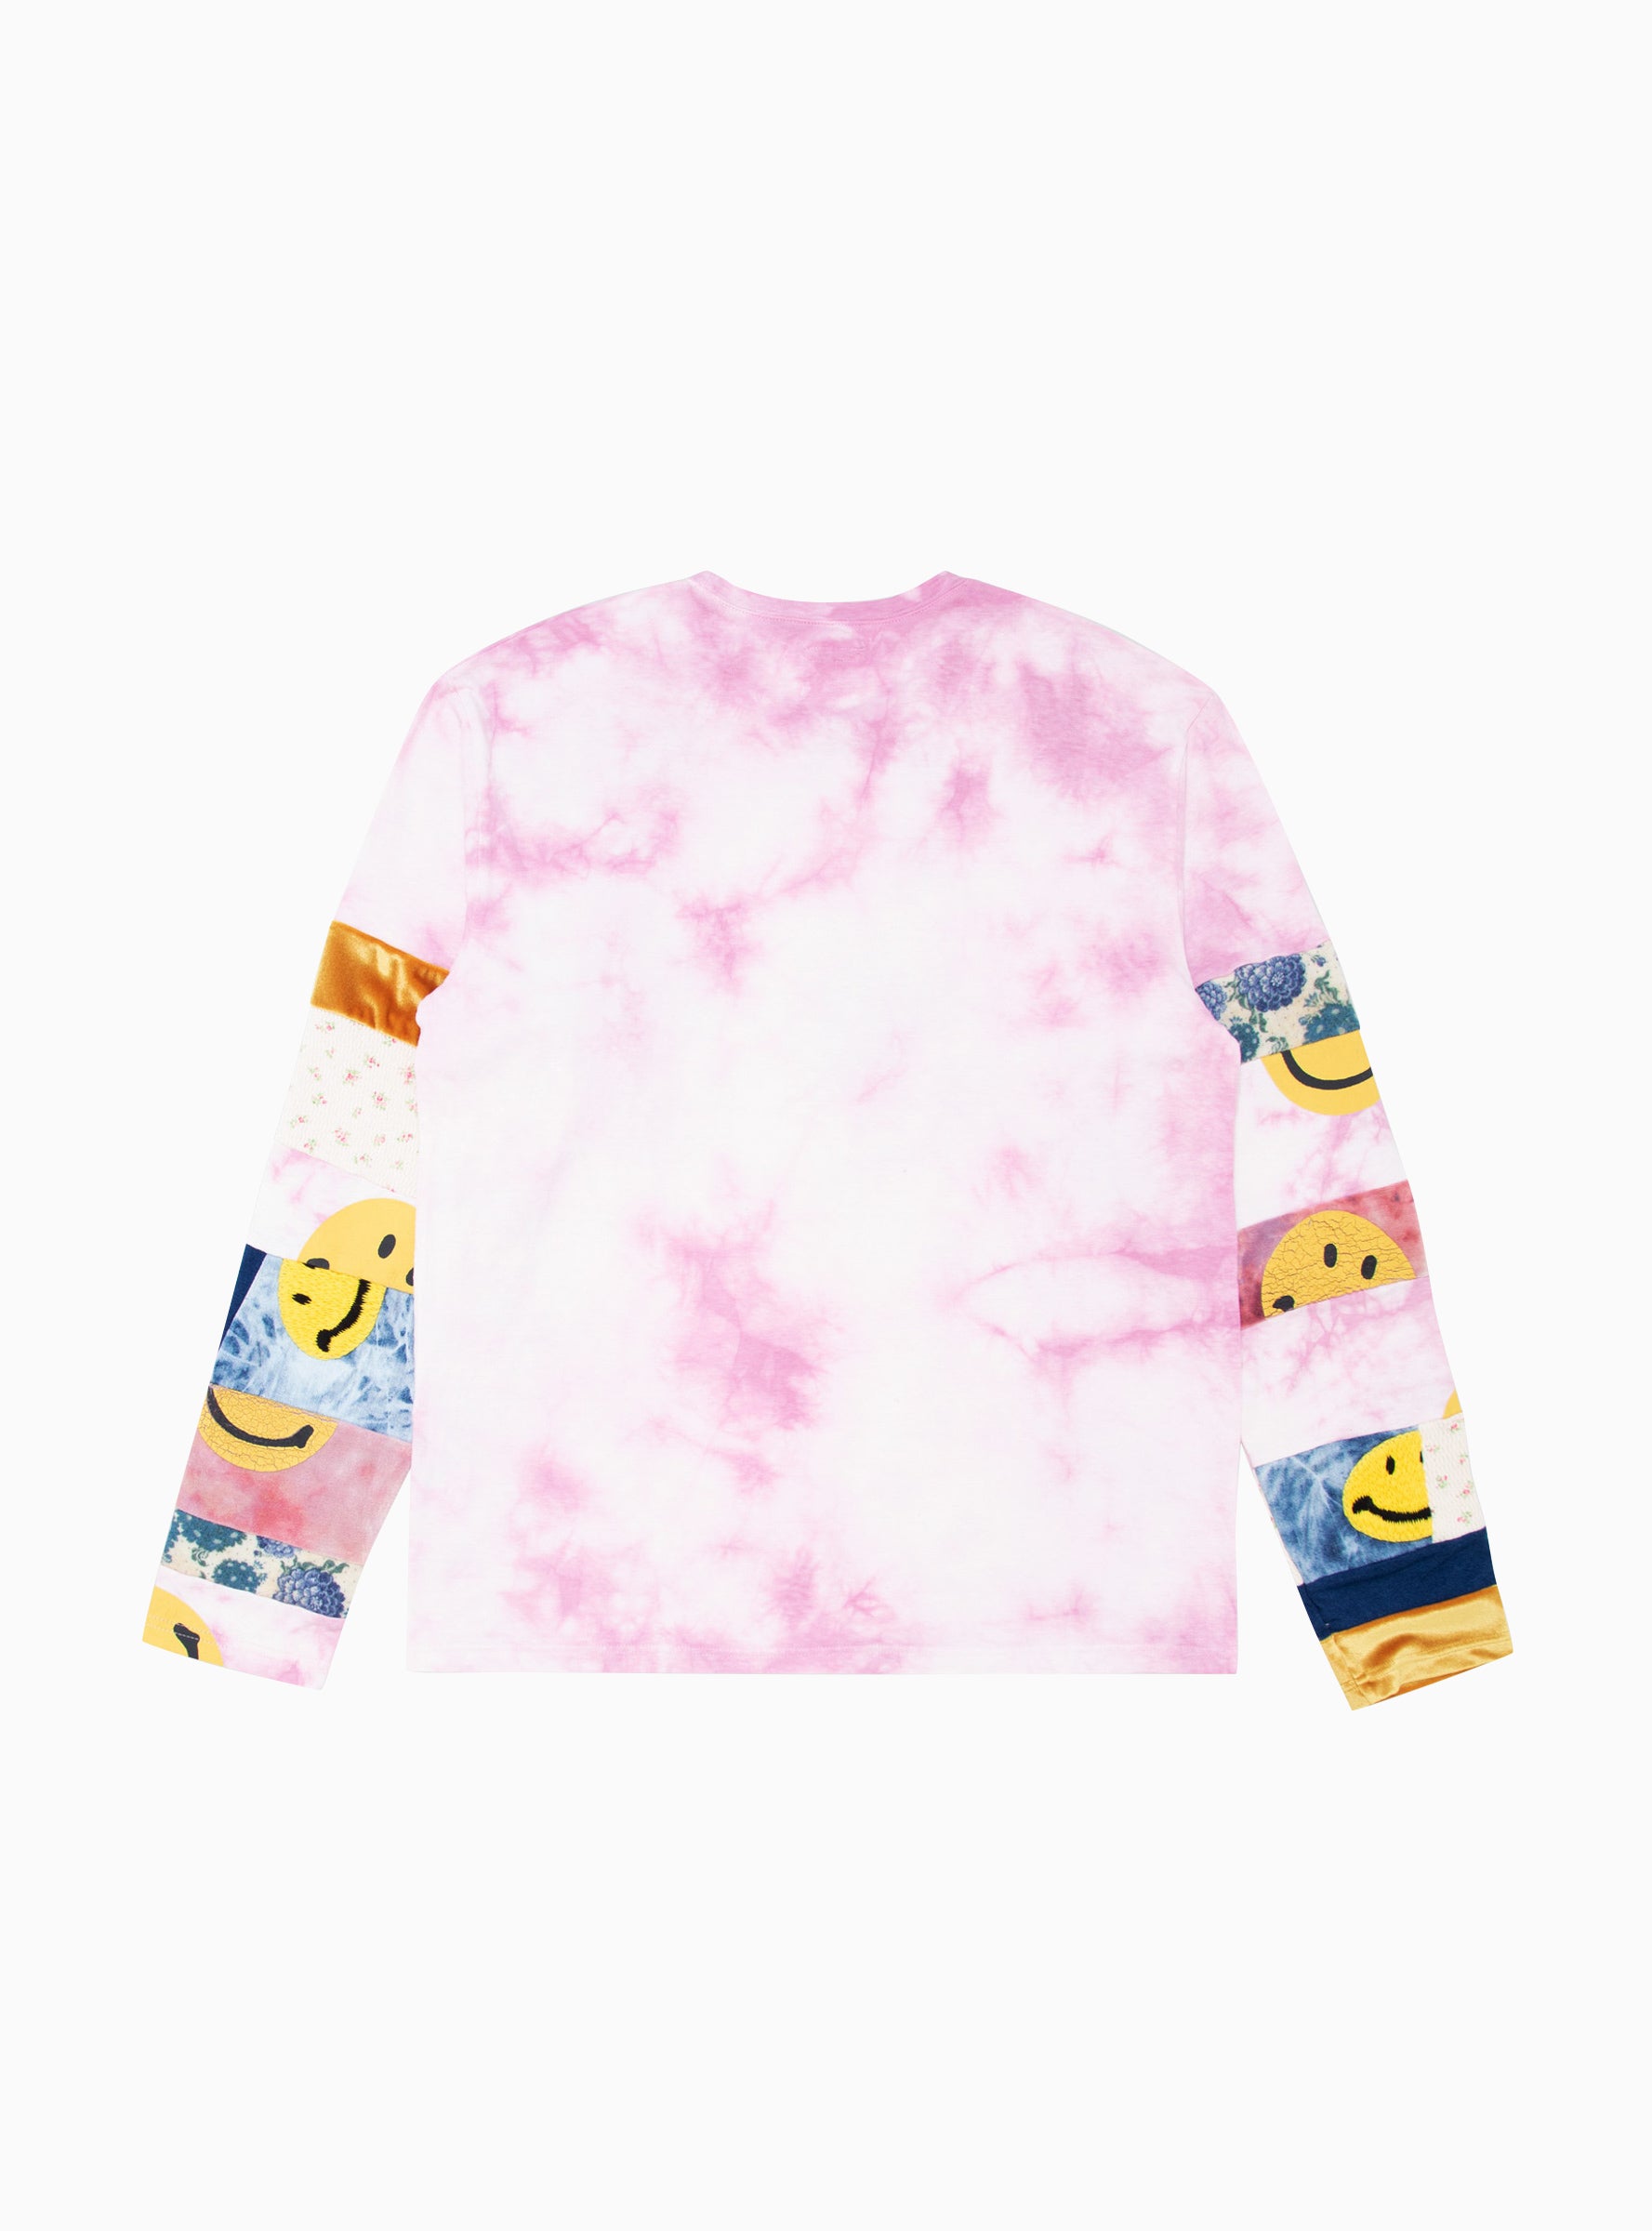 Smiles Nomad Patch Long Sleeve Tee Pink Tie Dye